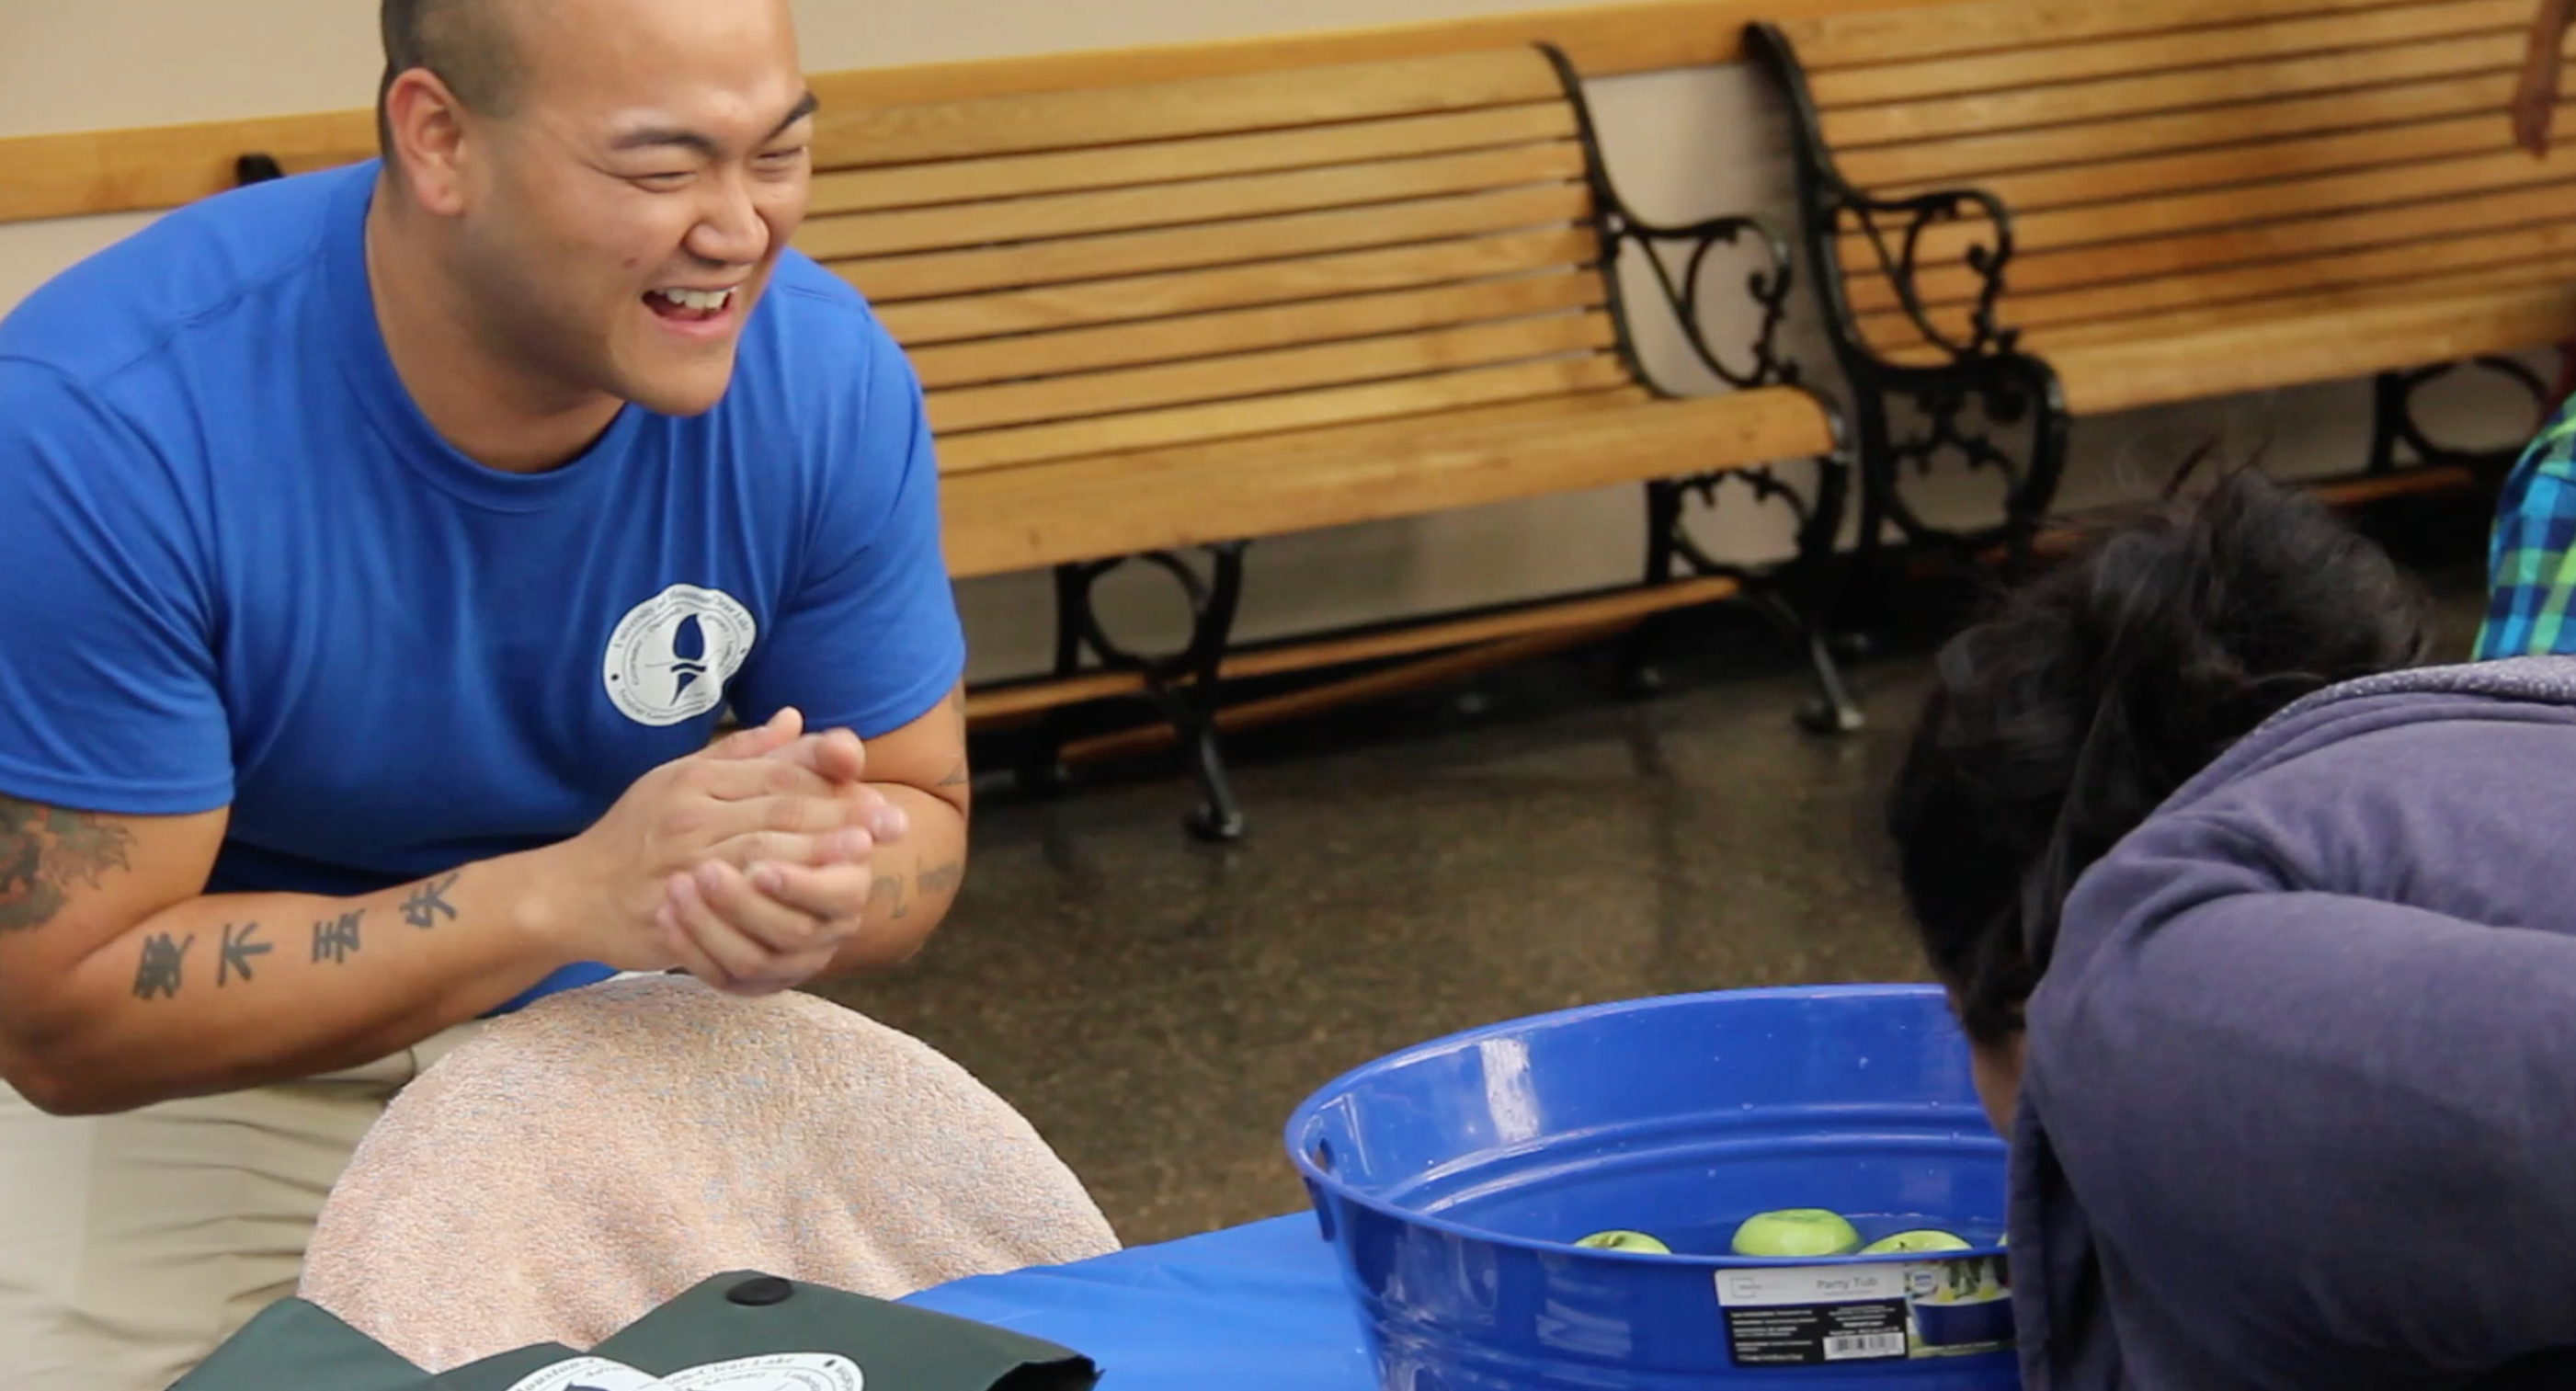 Image: SGA committee coordinator Tri Nguyen encourages a student bobbing for apples at the SGA booth at the 2015 I Heart UHCL Day. Photo by The Signal reporter Kyle Harrison.